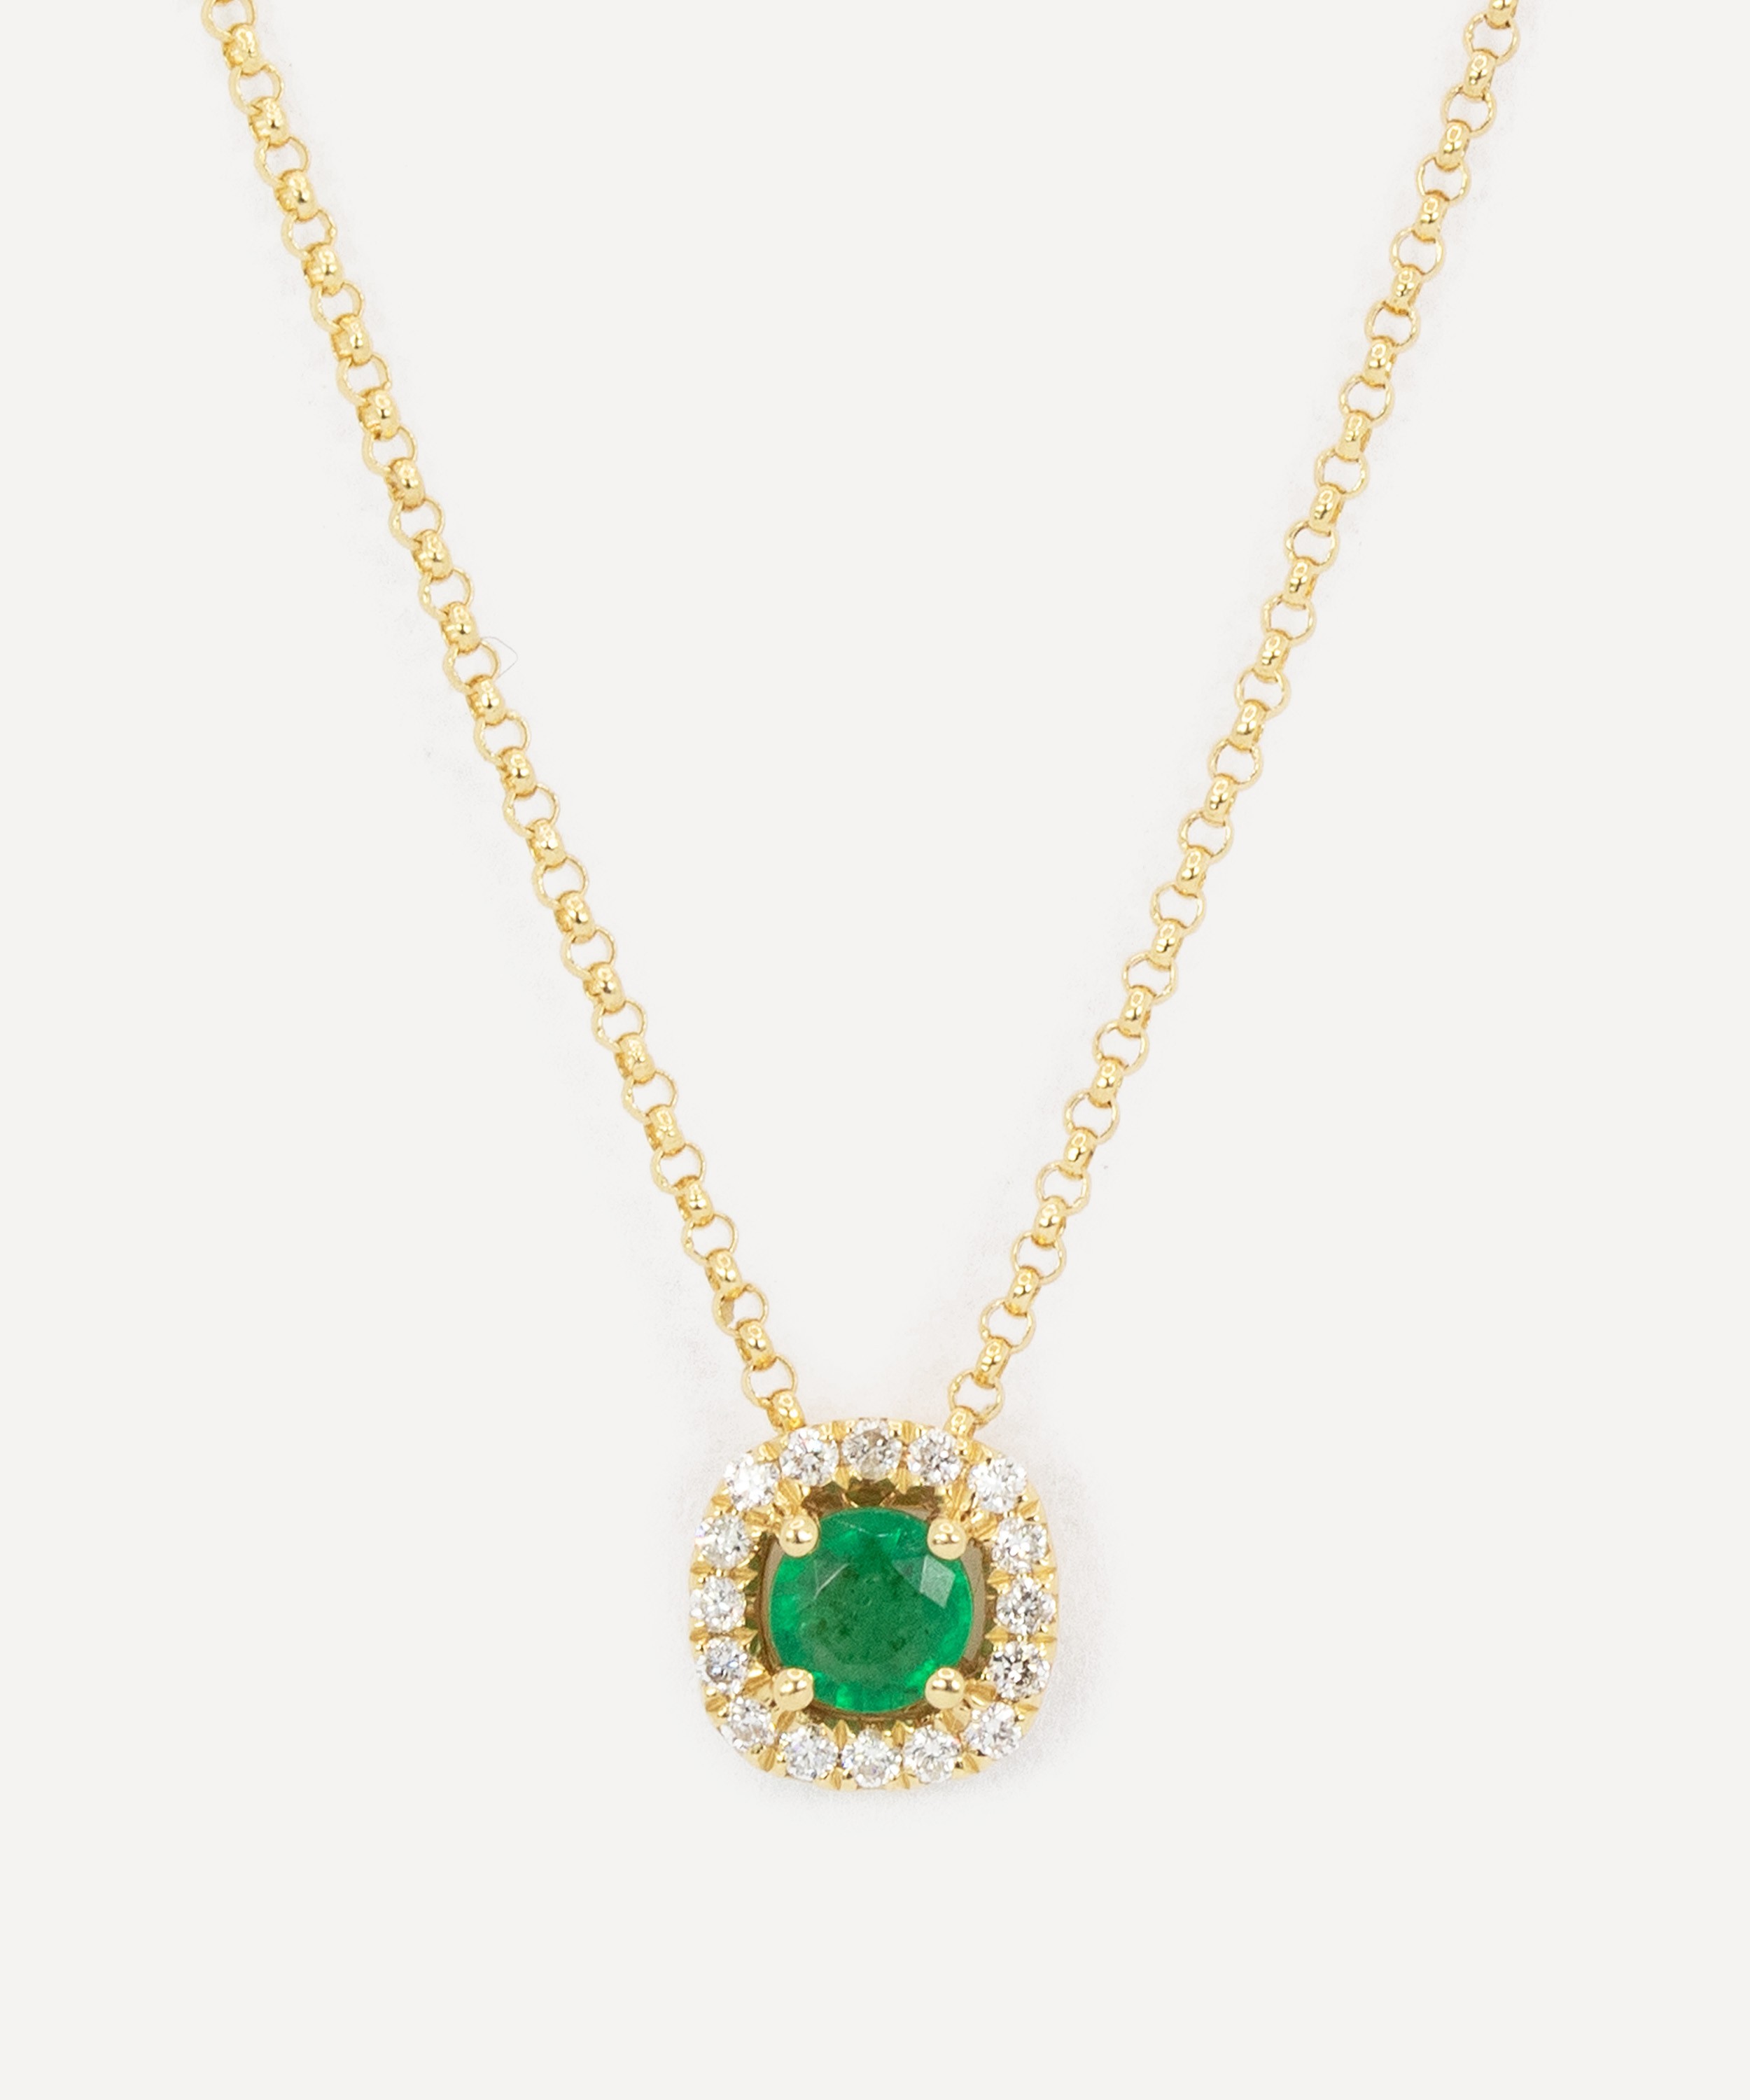 Kojis - 18ct Gold Emerald and Diamond Cluster Pendant Necklace